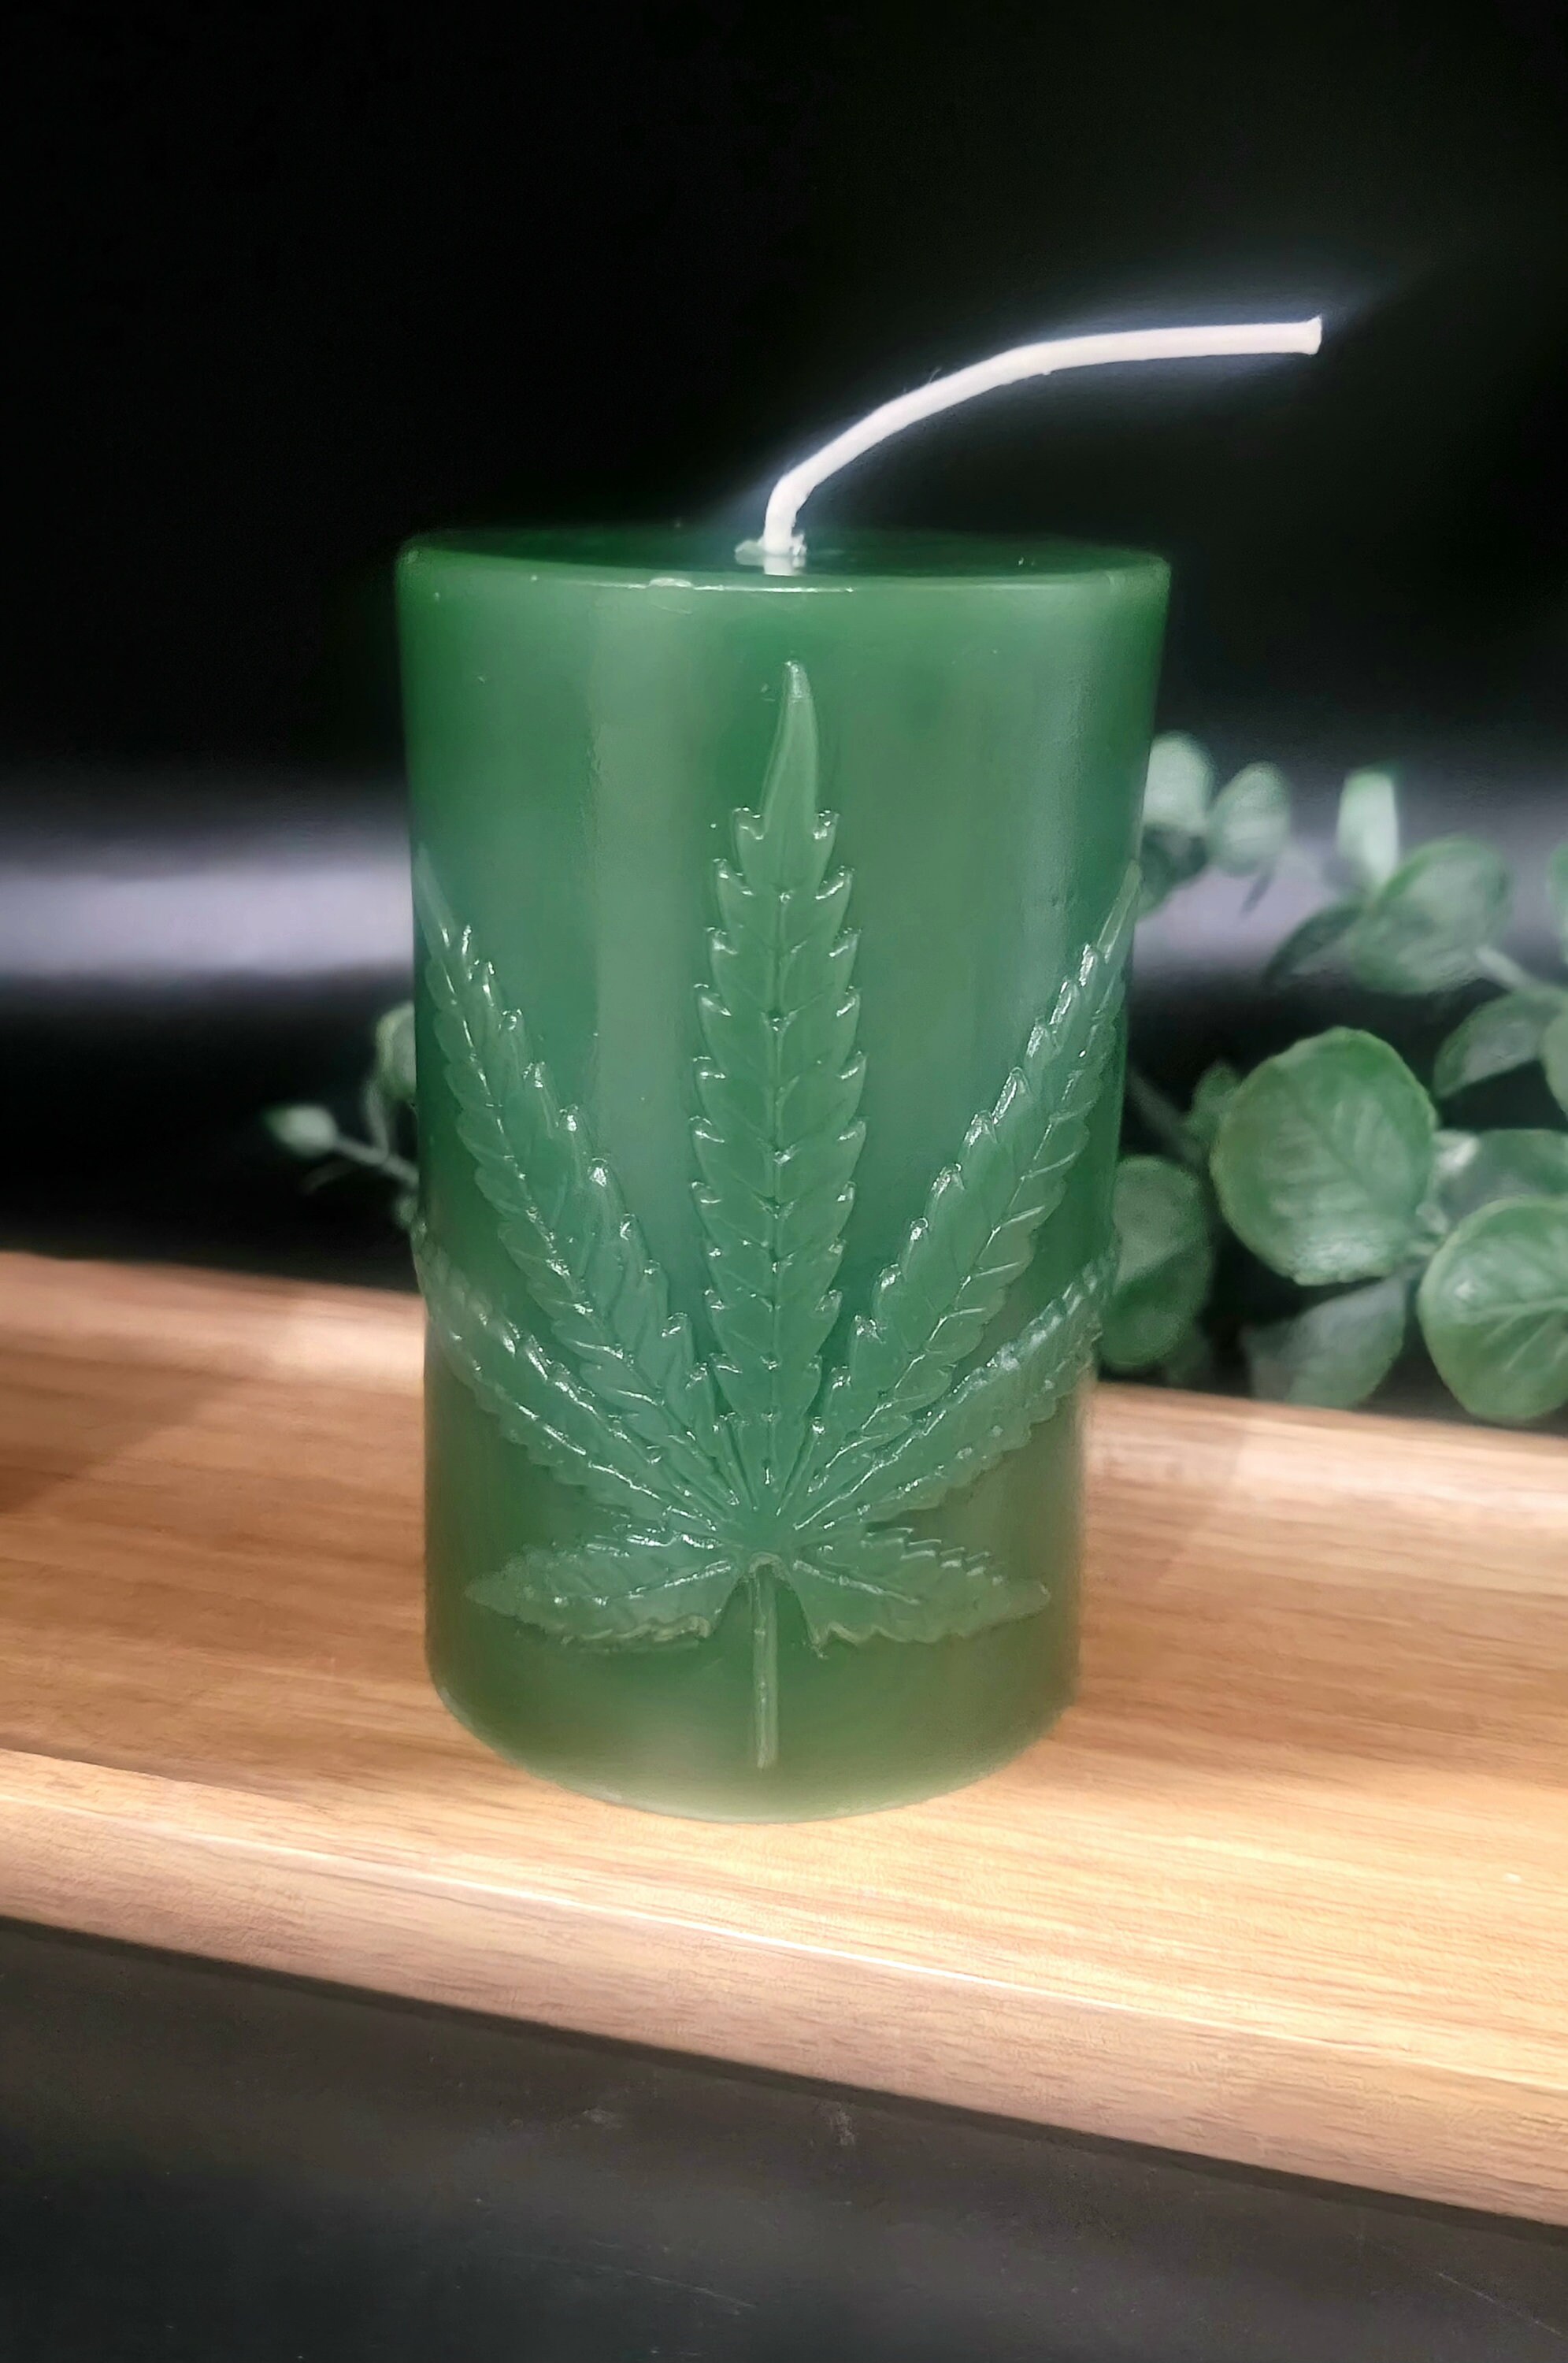 Instagram post showcasing a weed candle design